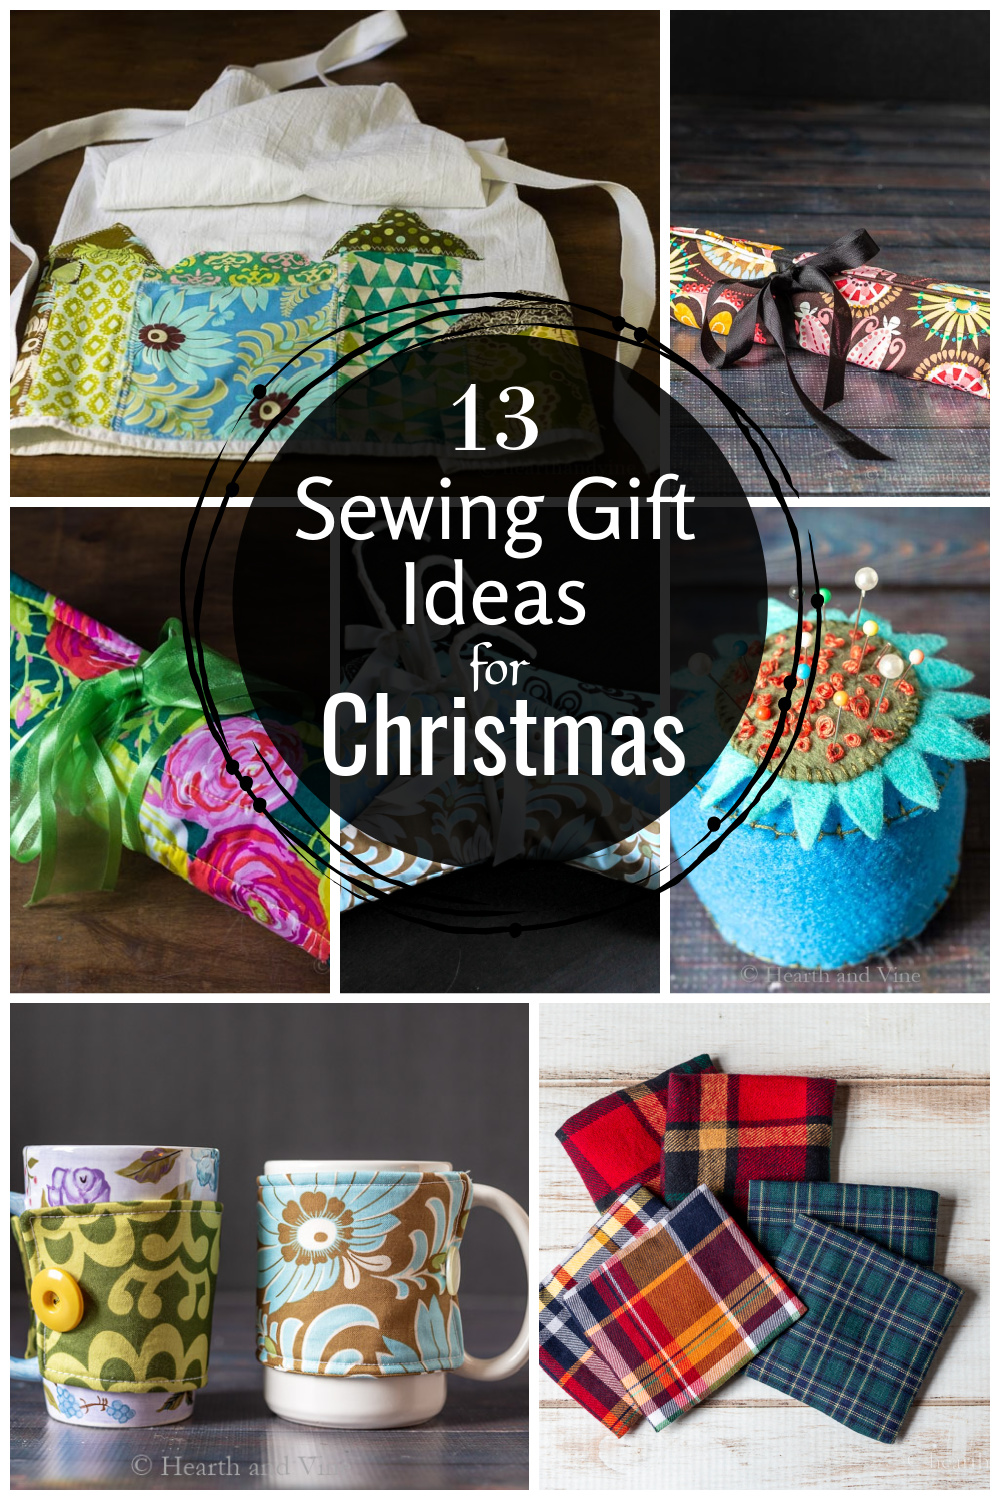 DIY Gift Ideas - Easy Sewing Projects + More! | 12 Days Of Rosery - YouTube